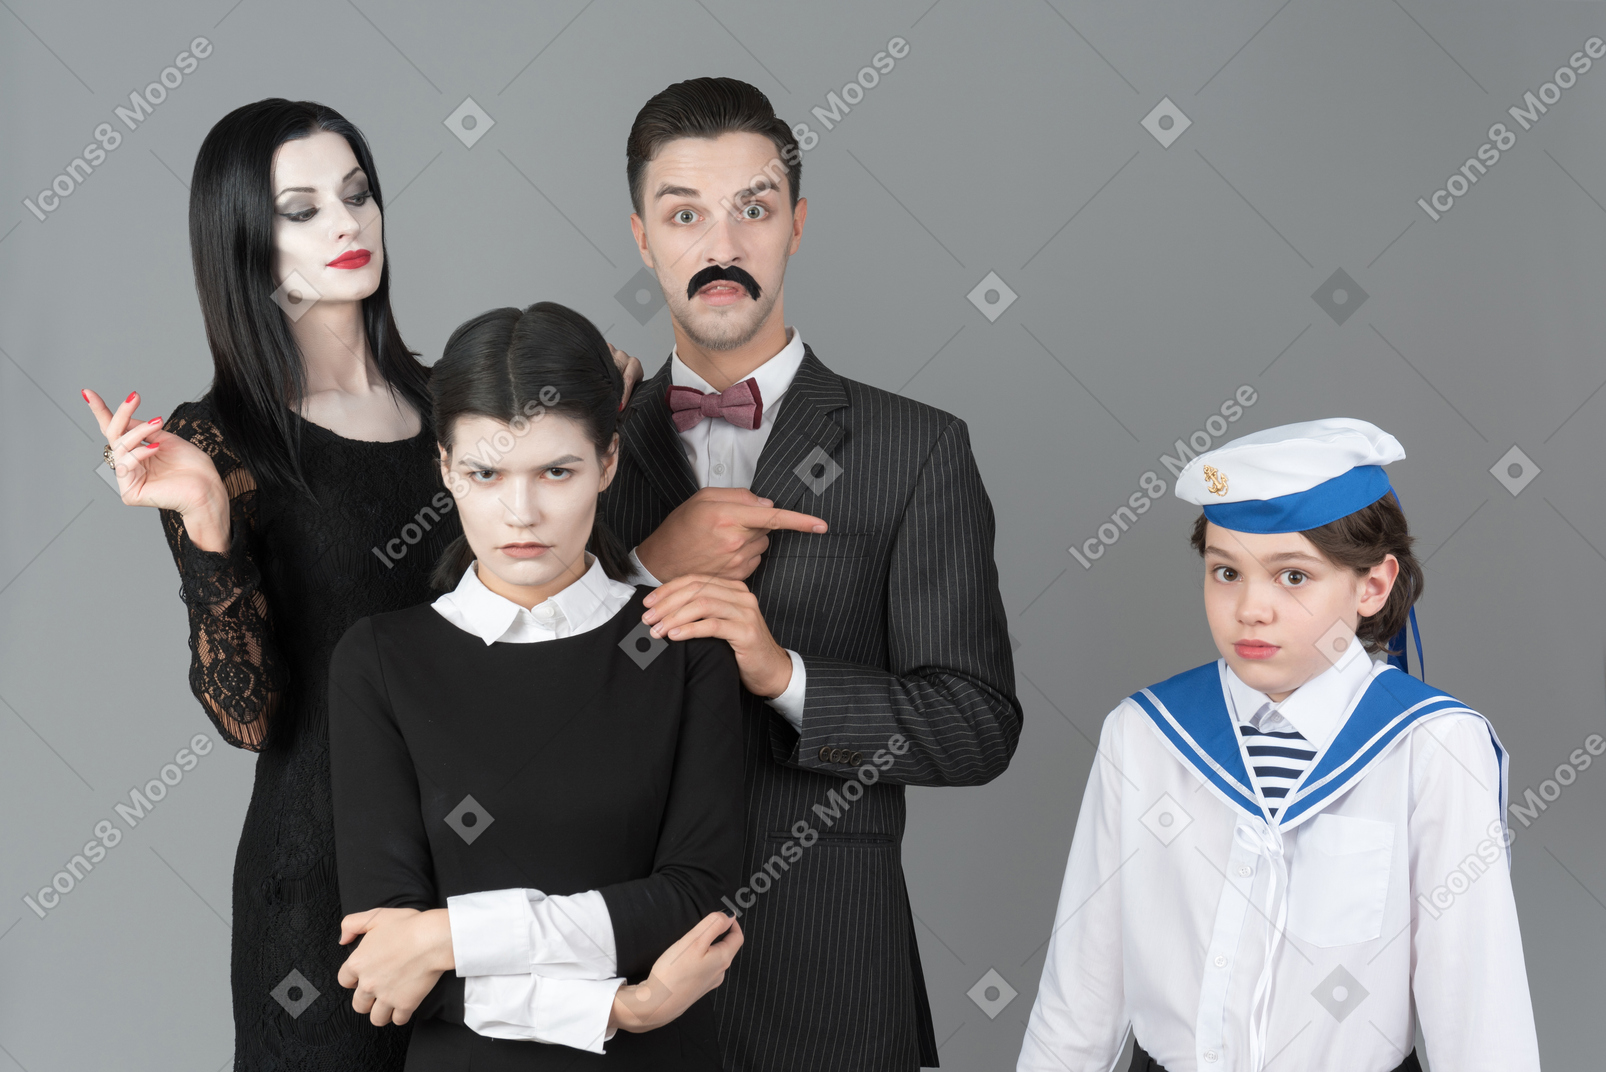 Addams family members pointing at confused boy in sailor's uniform